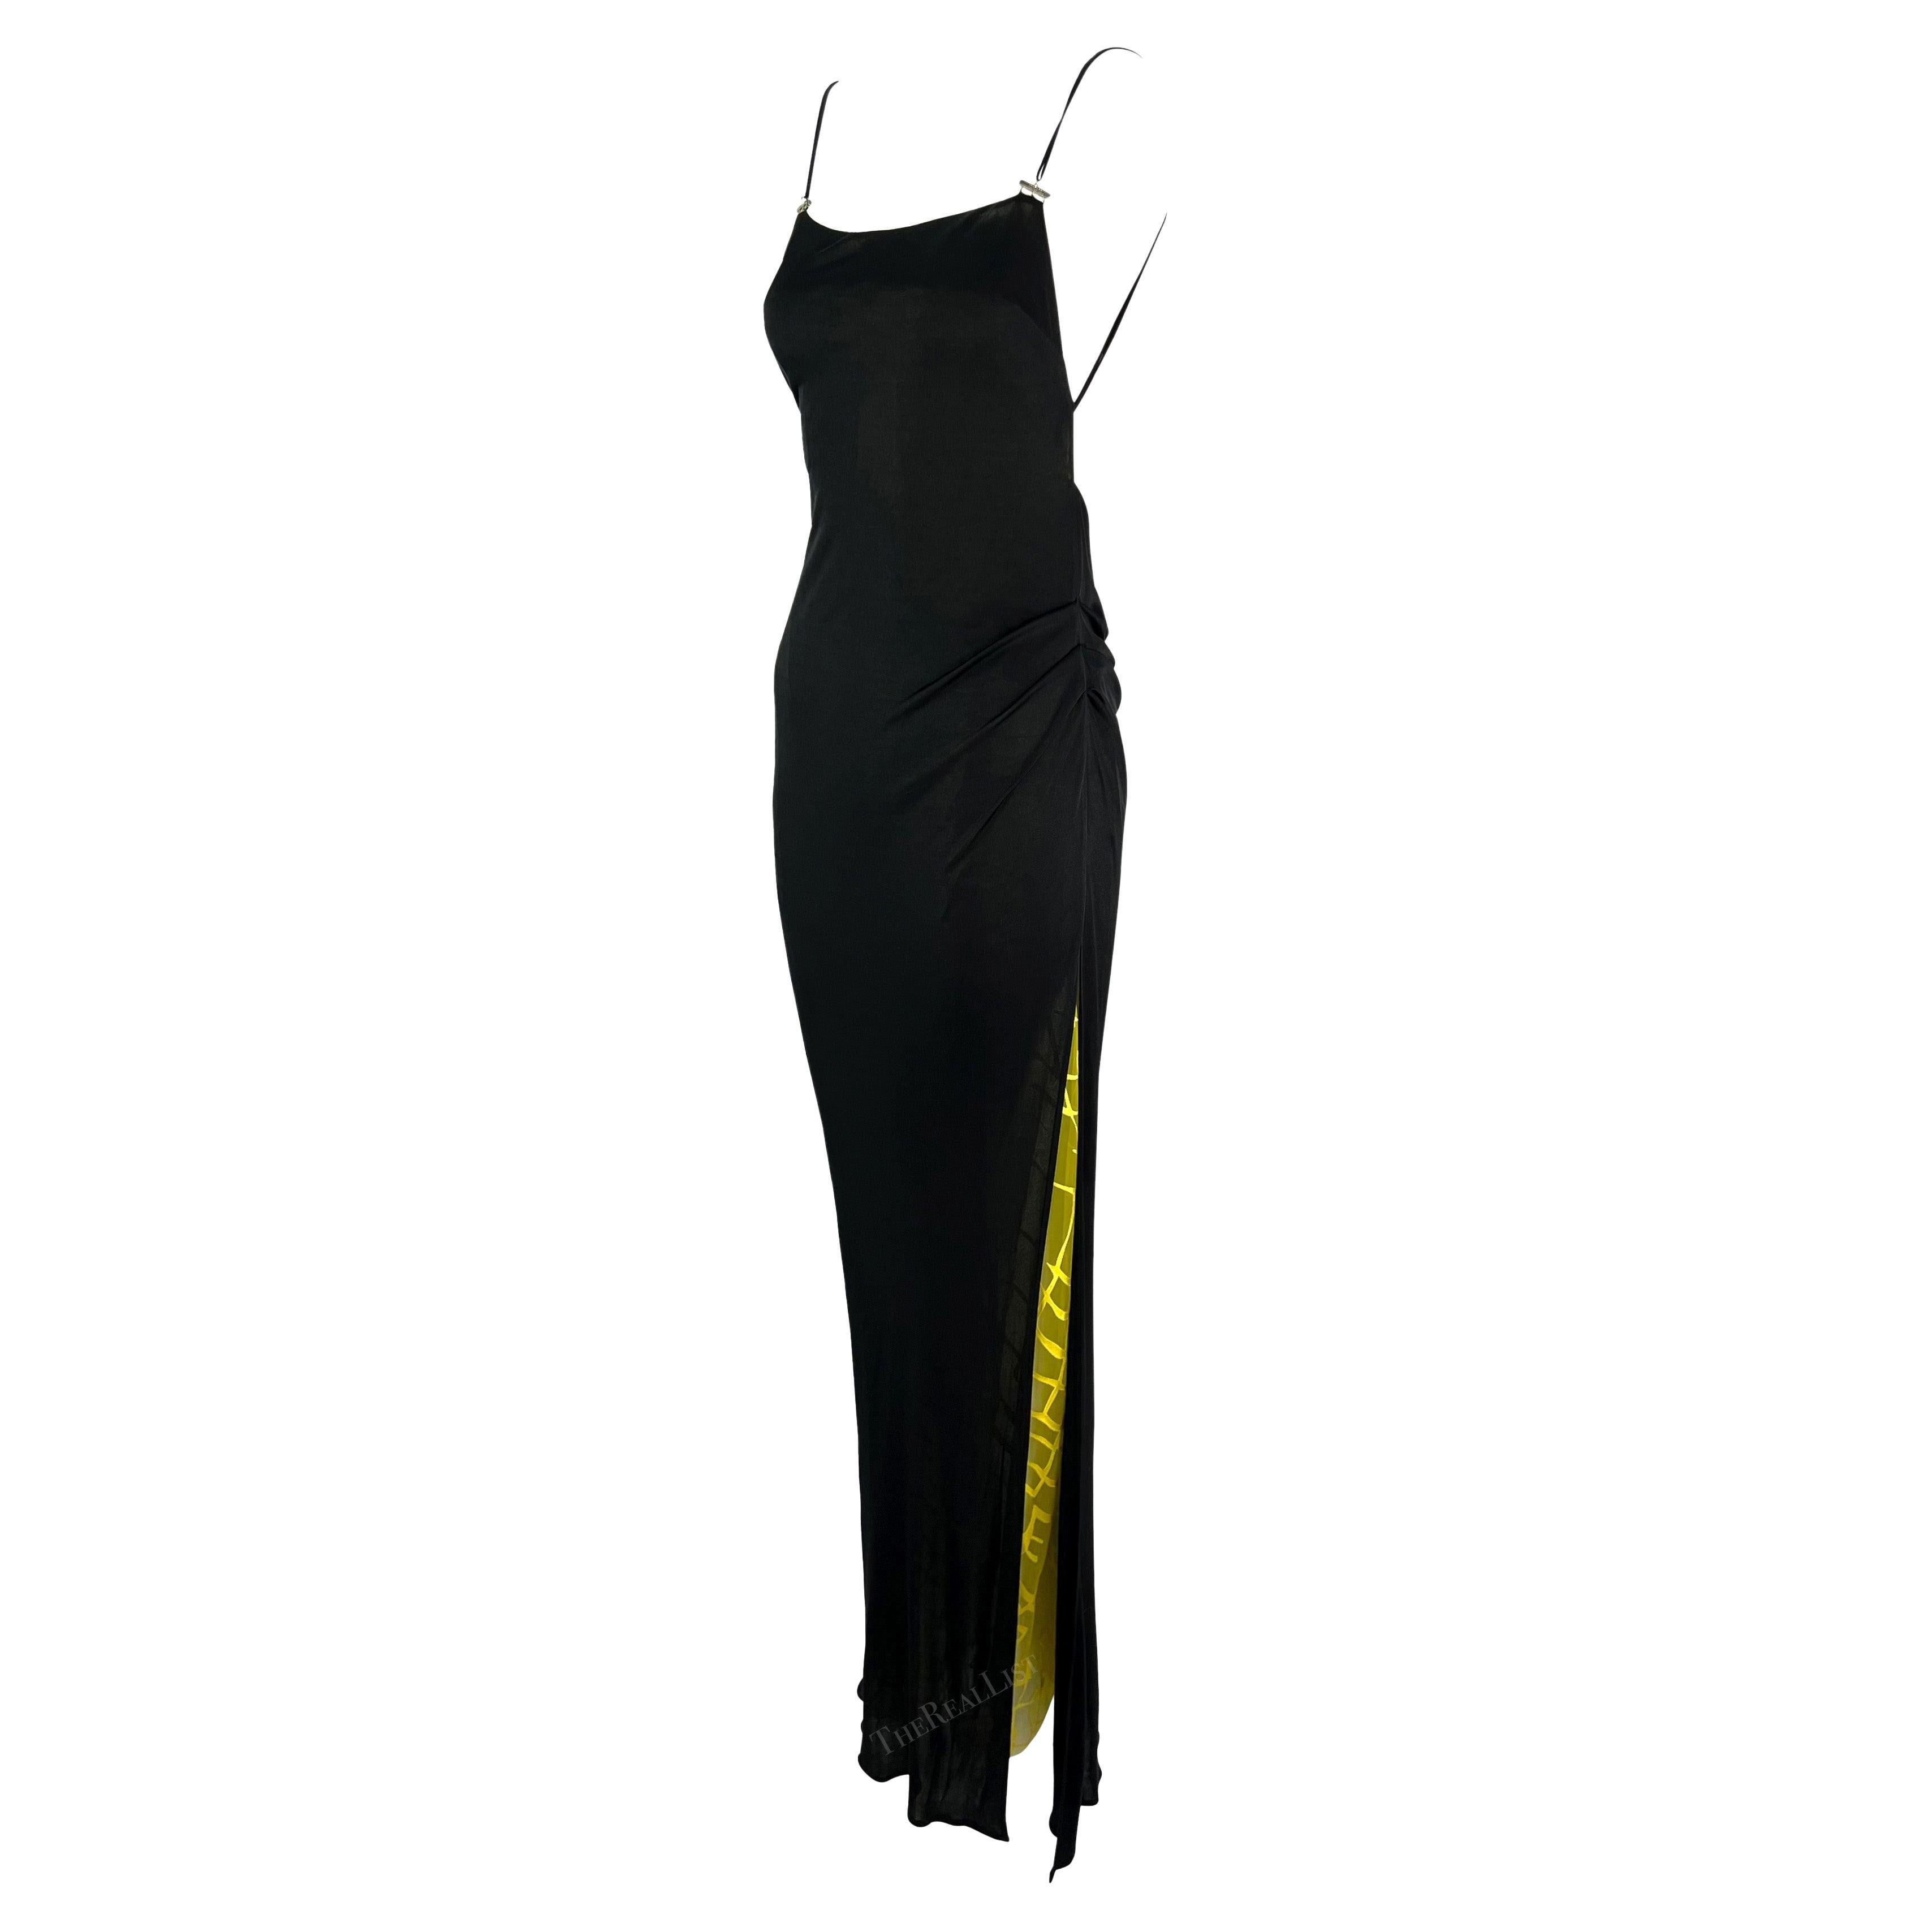 S/S 1999 Gianni Versace by Donatella Ruched Black High-Slit Yellow Mesh Gown For Sale